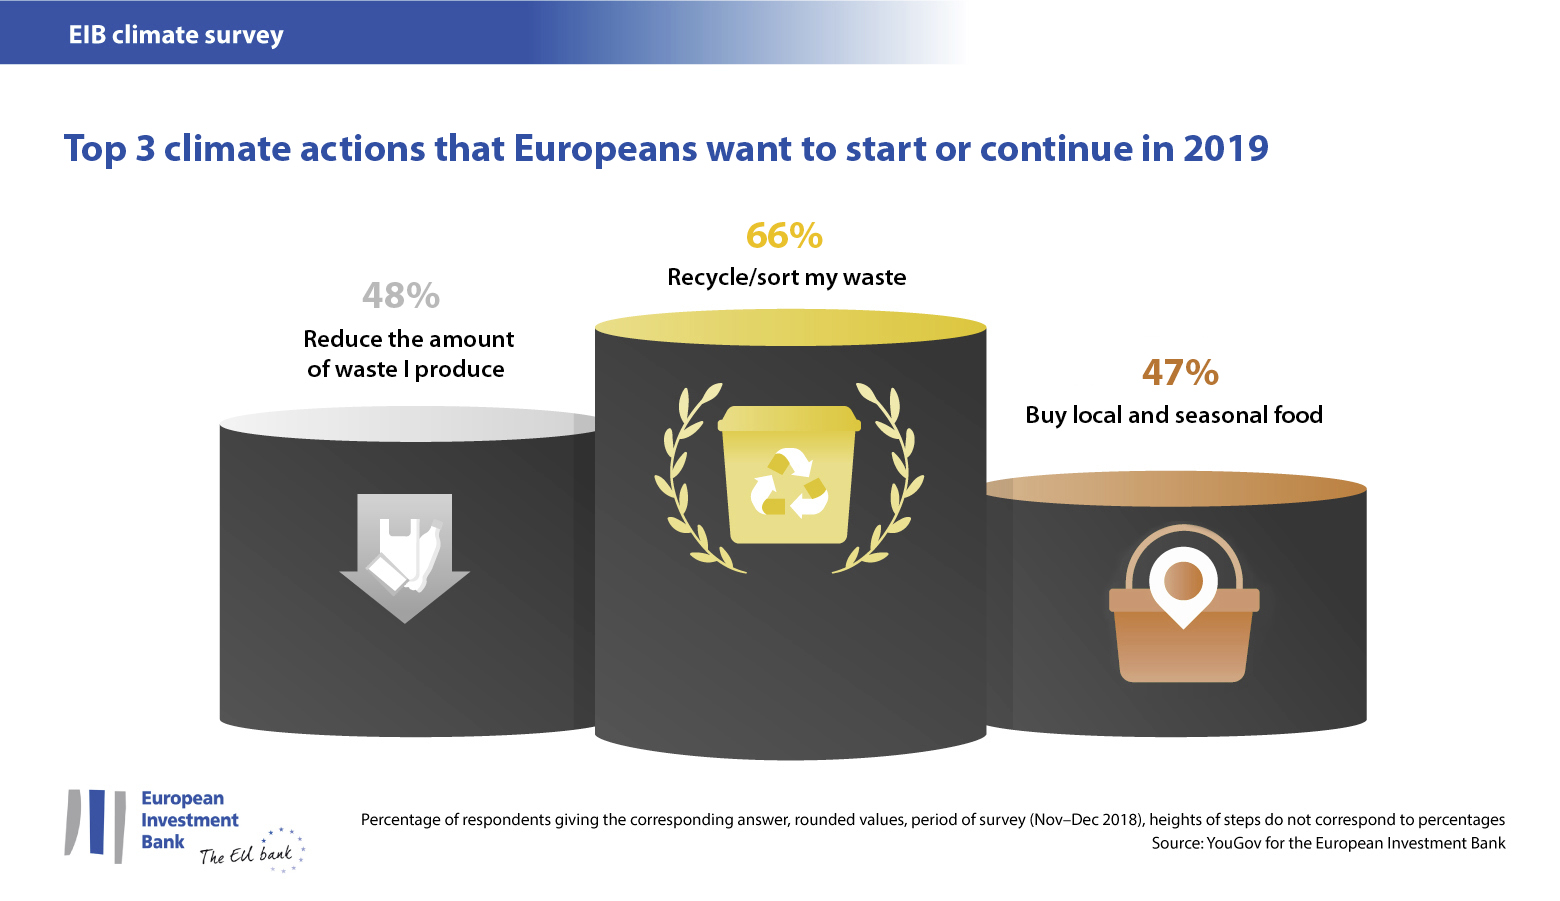 Top 3 climate actions that Europeans want to start or continue in 2019